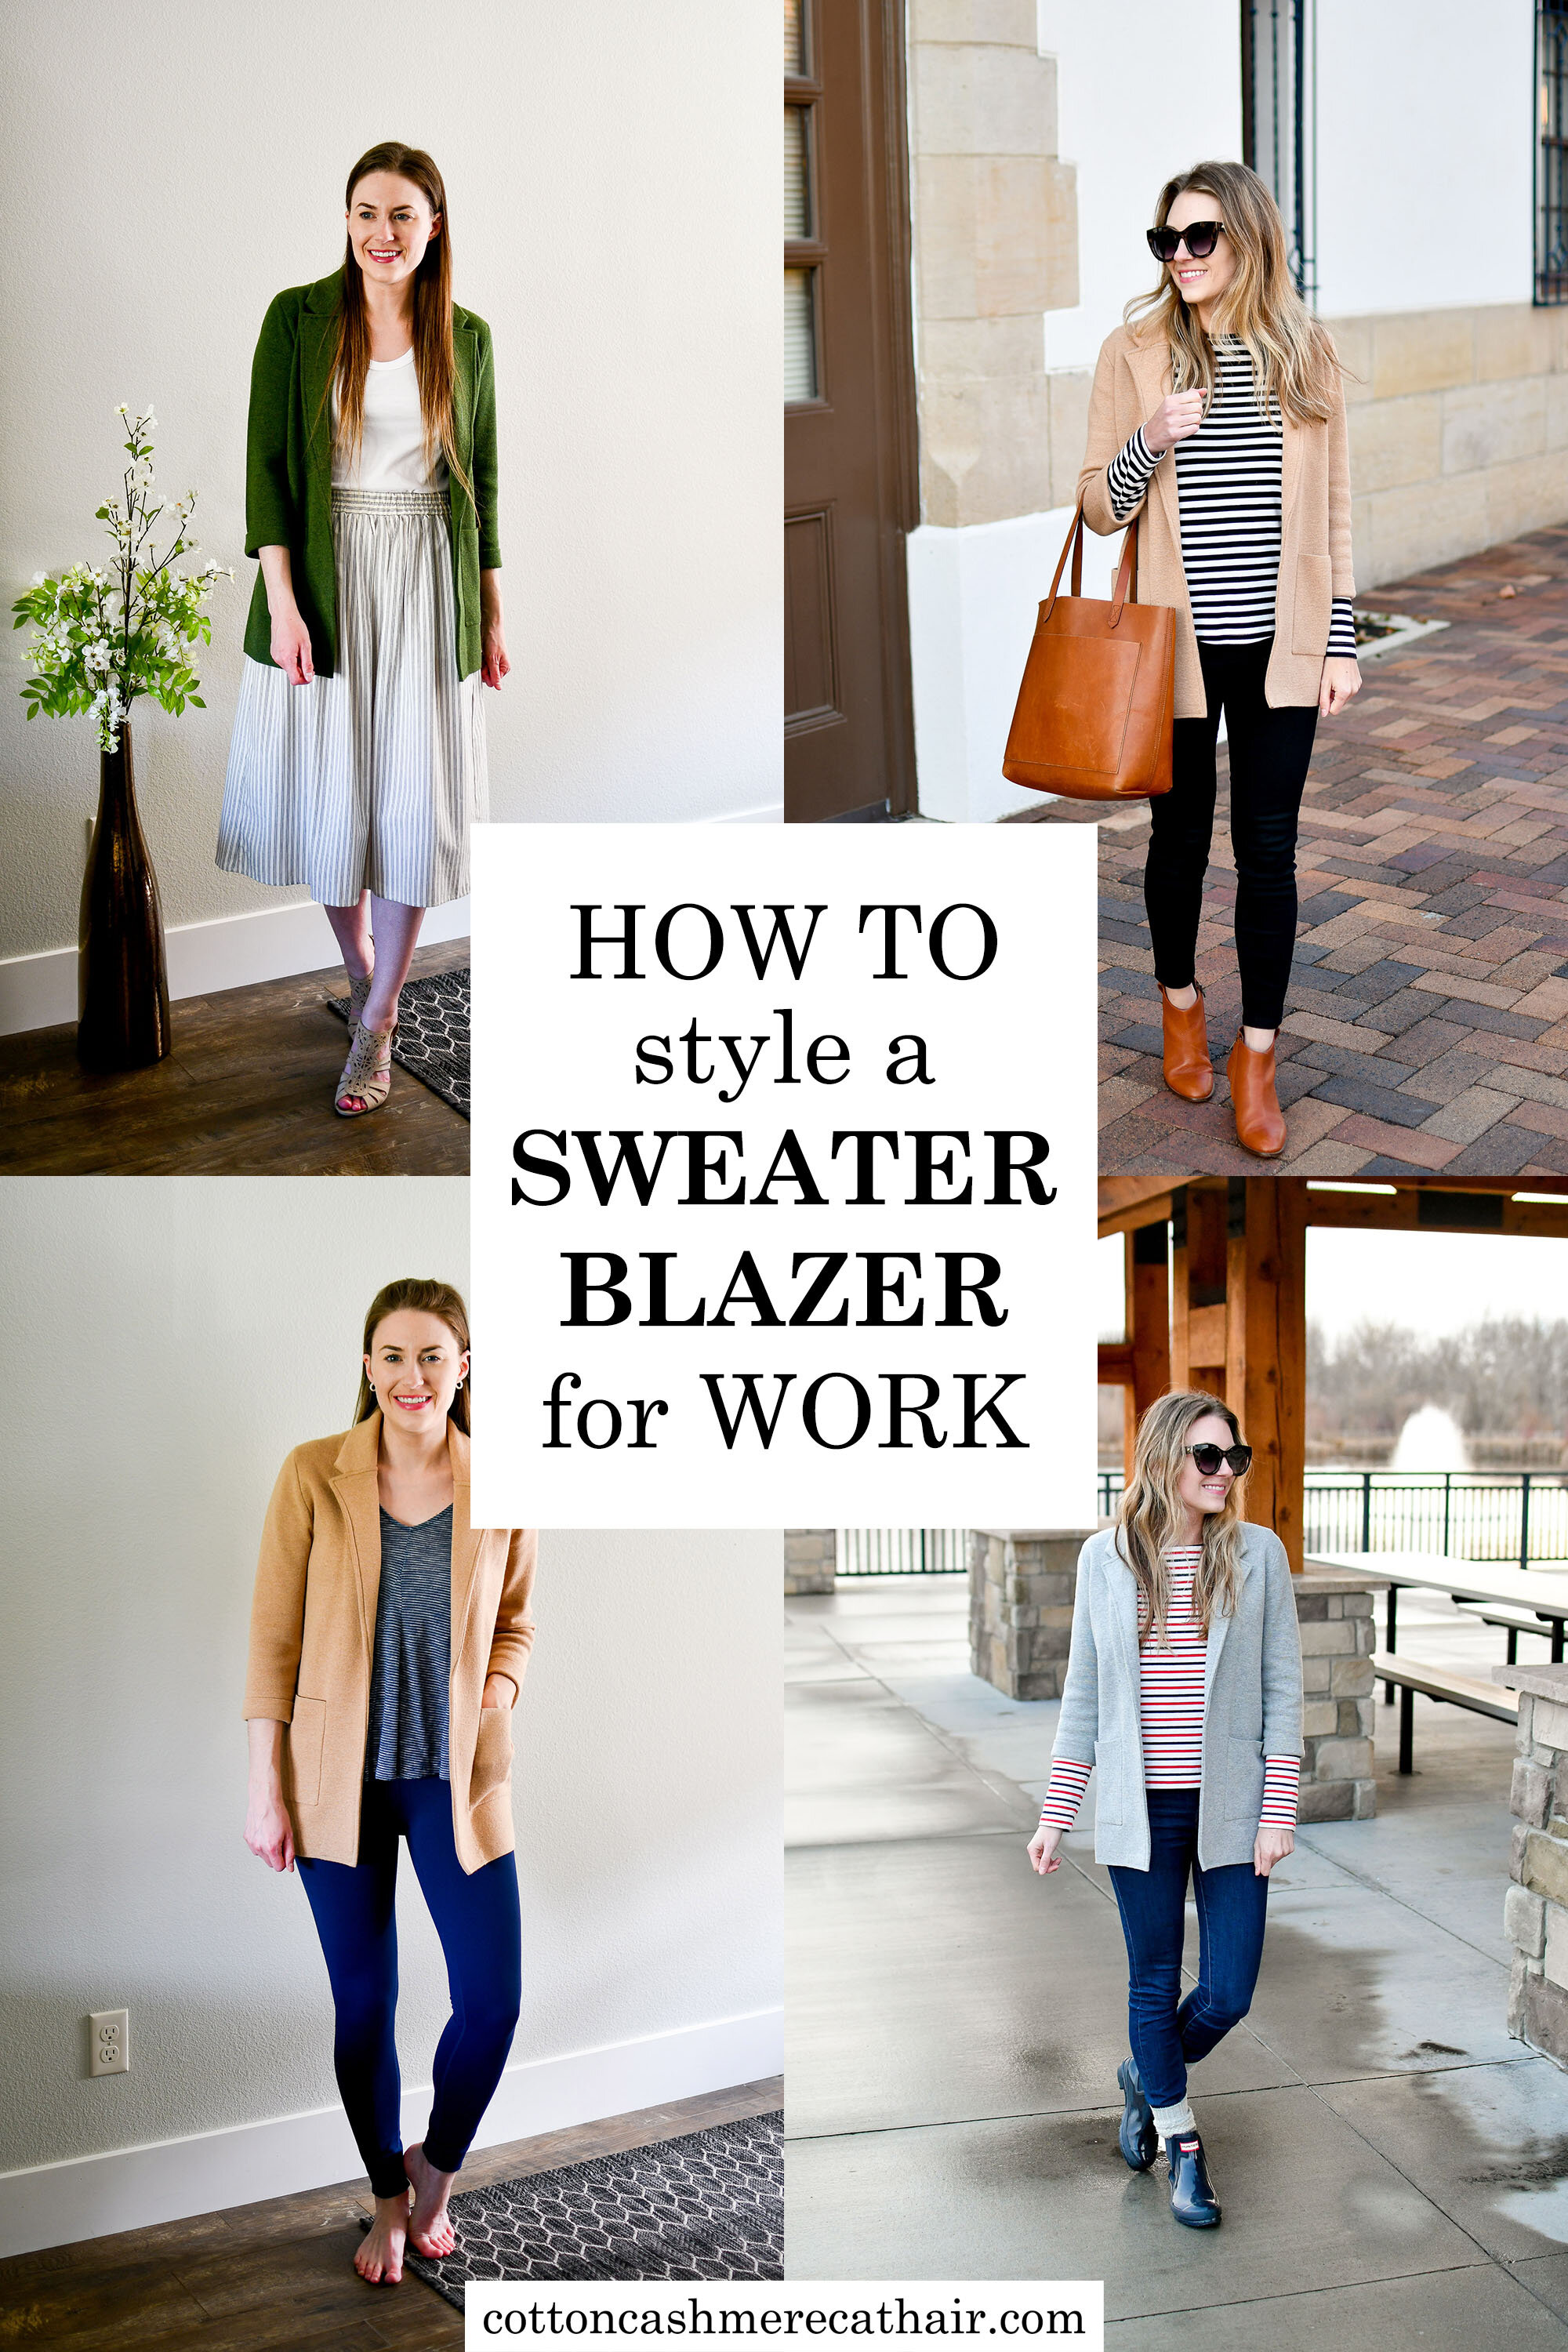 How to style a sweater blazer for work